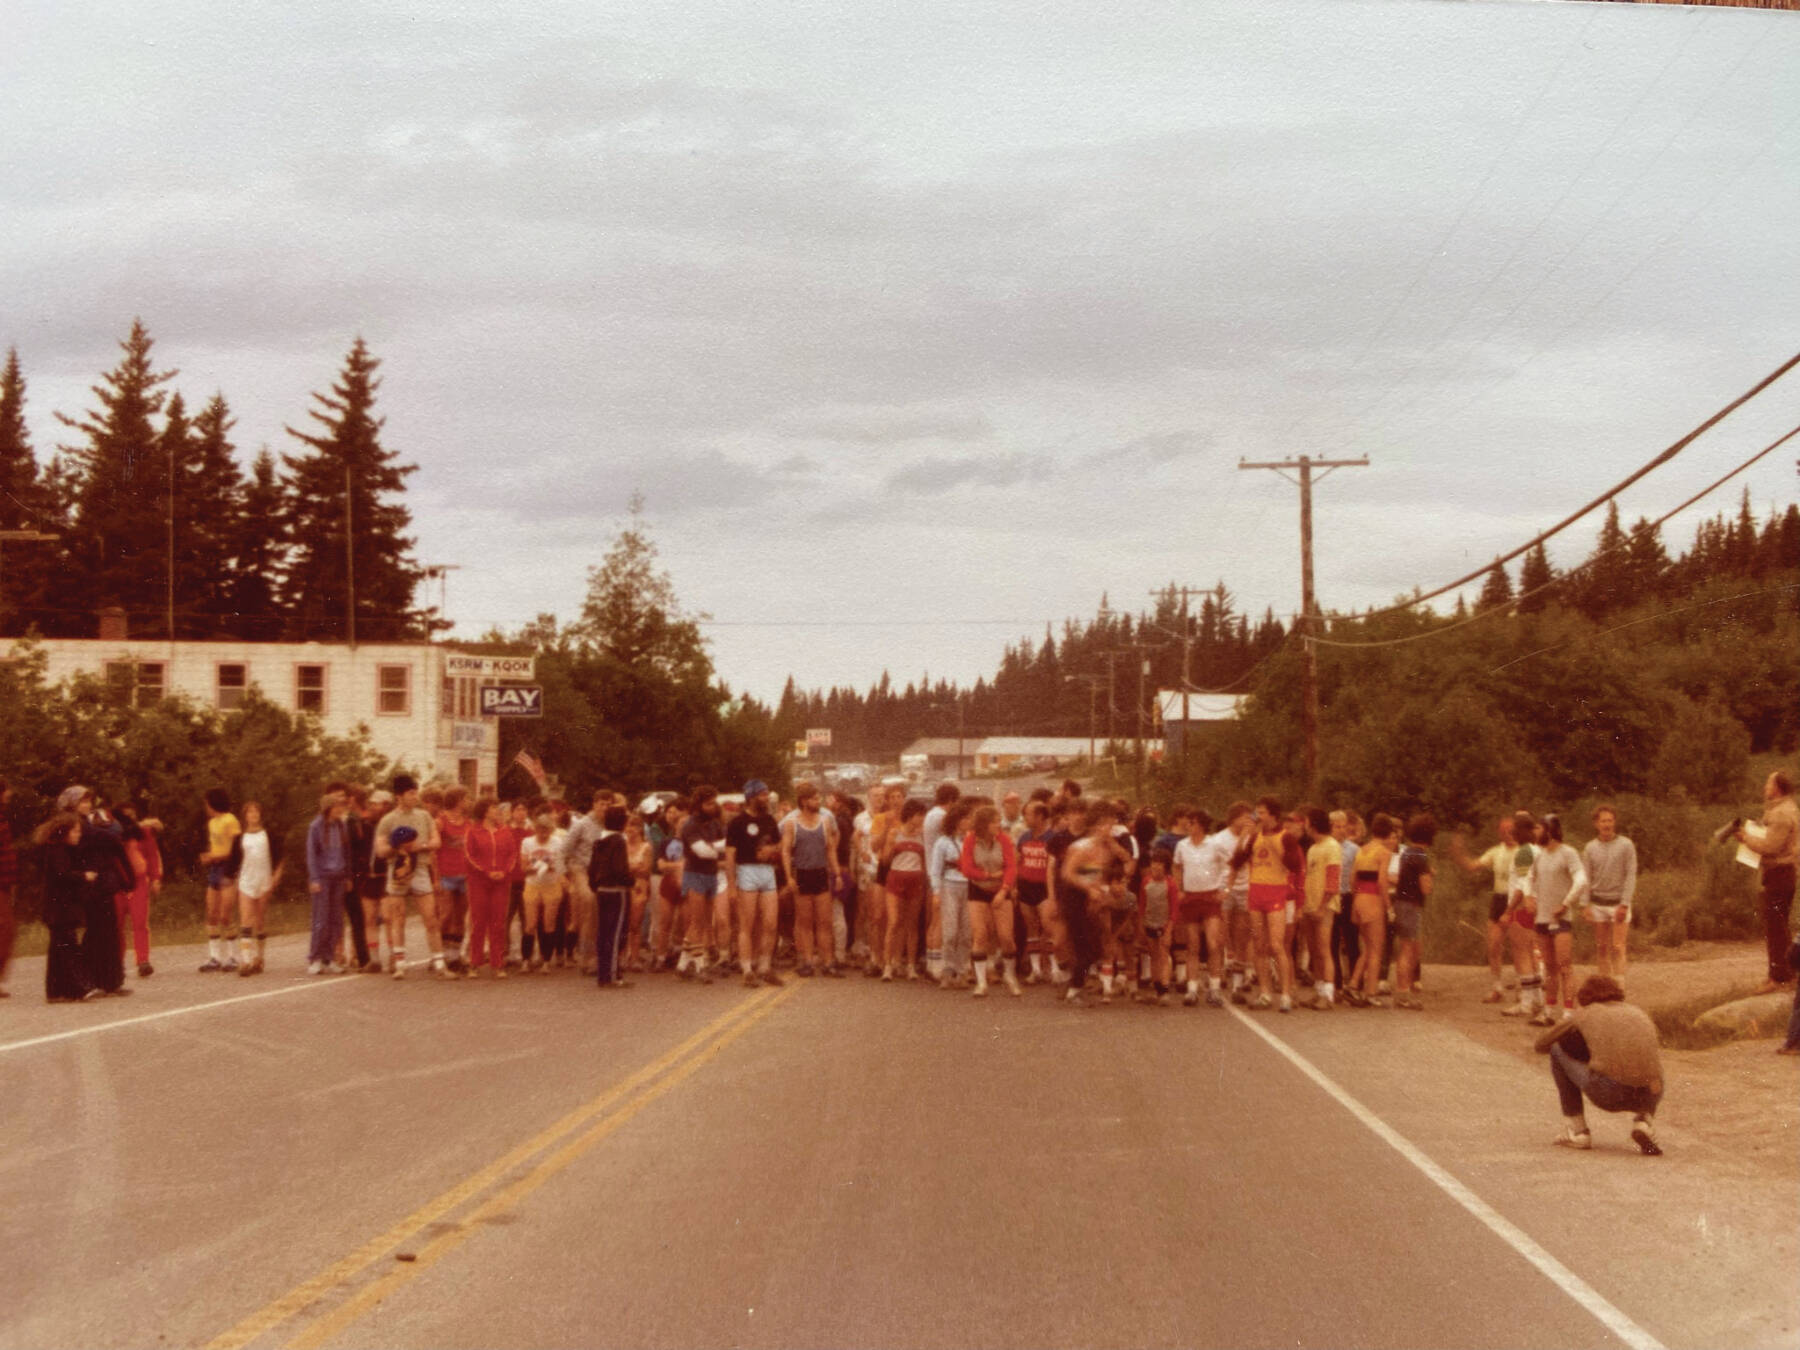 Photo provided by Jennifer Waltenbaugh
The Homer Spit Race starts on Pioneer Avenue in 1982.